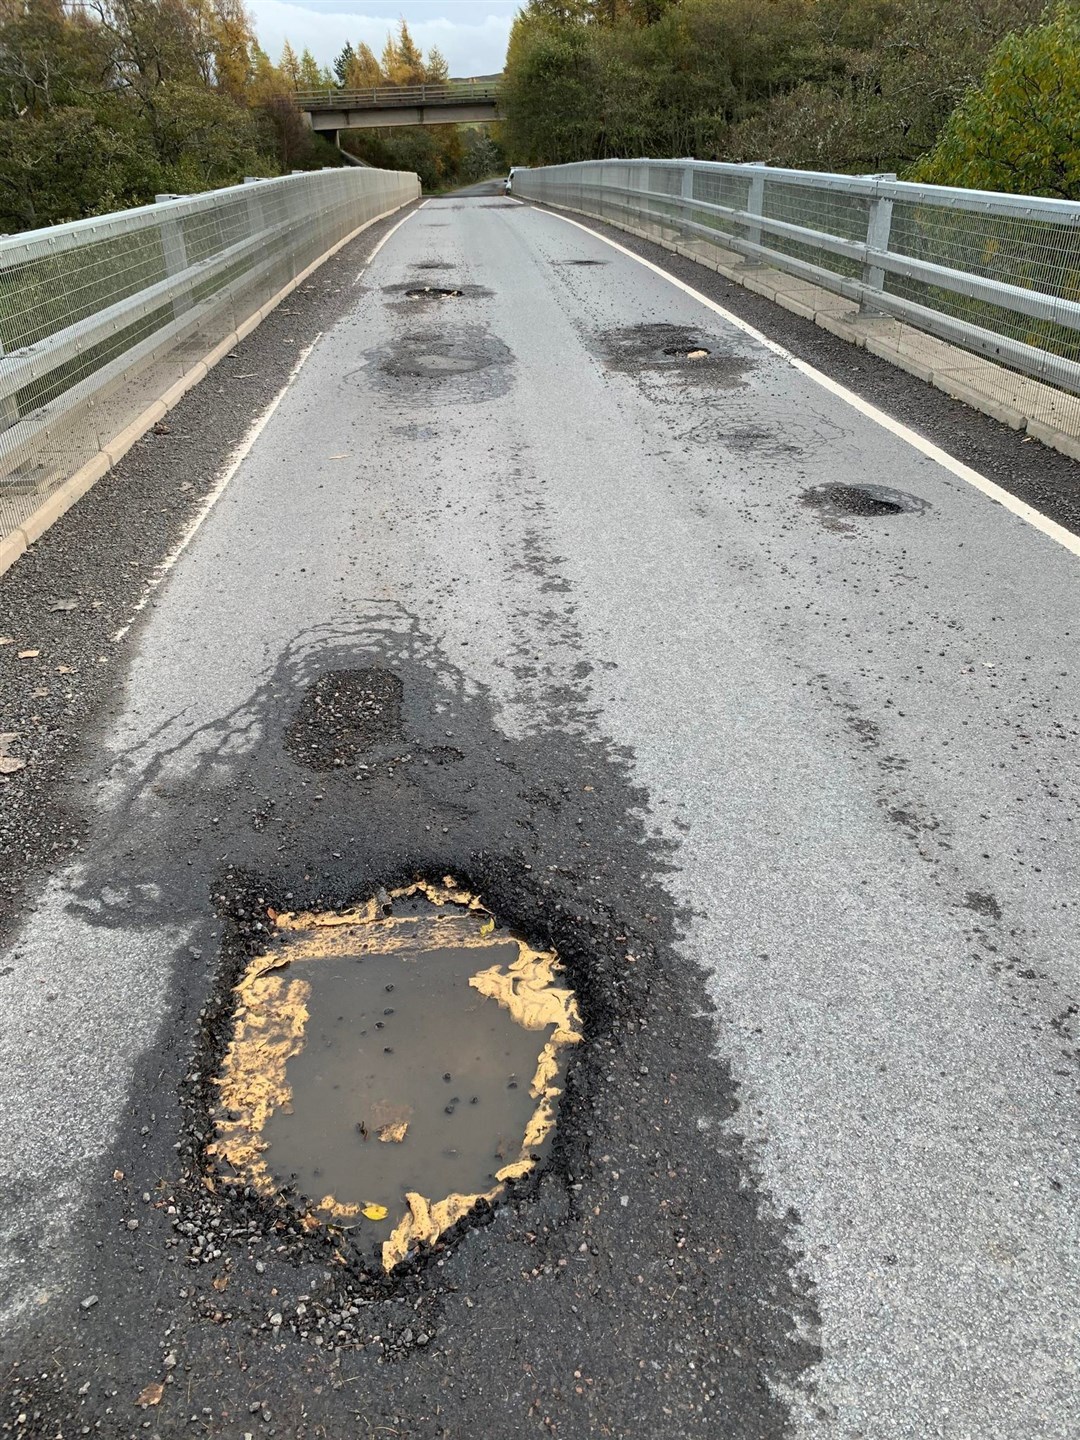 Spey Bridge holes at Kingussie have now been patched, but there plenty more across the region nto fill - even on the A9 there are serious new repairs needed, motorists found this week on the stretch between Newtonmore and Dalwhinnie